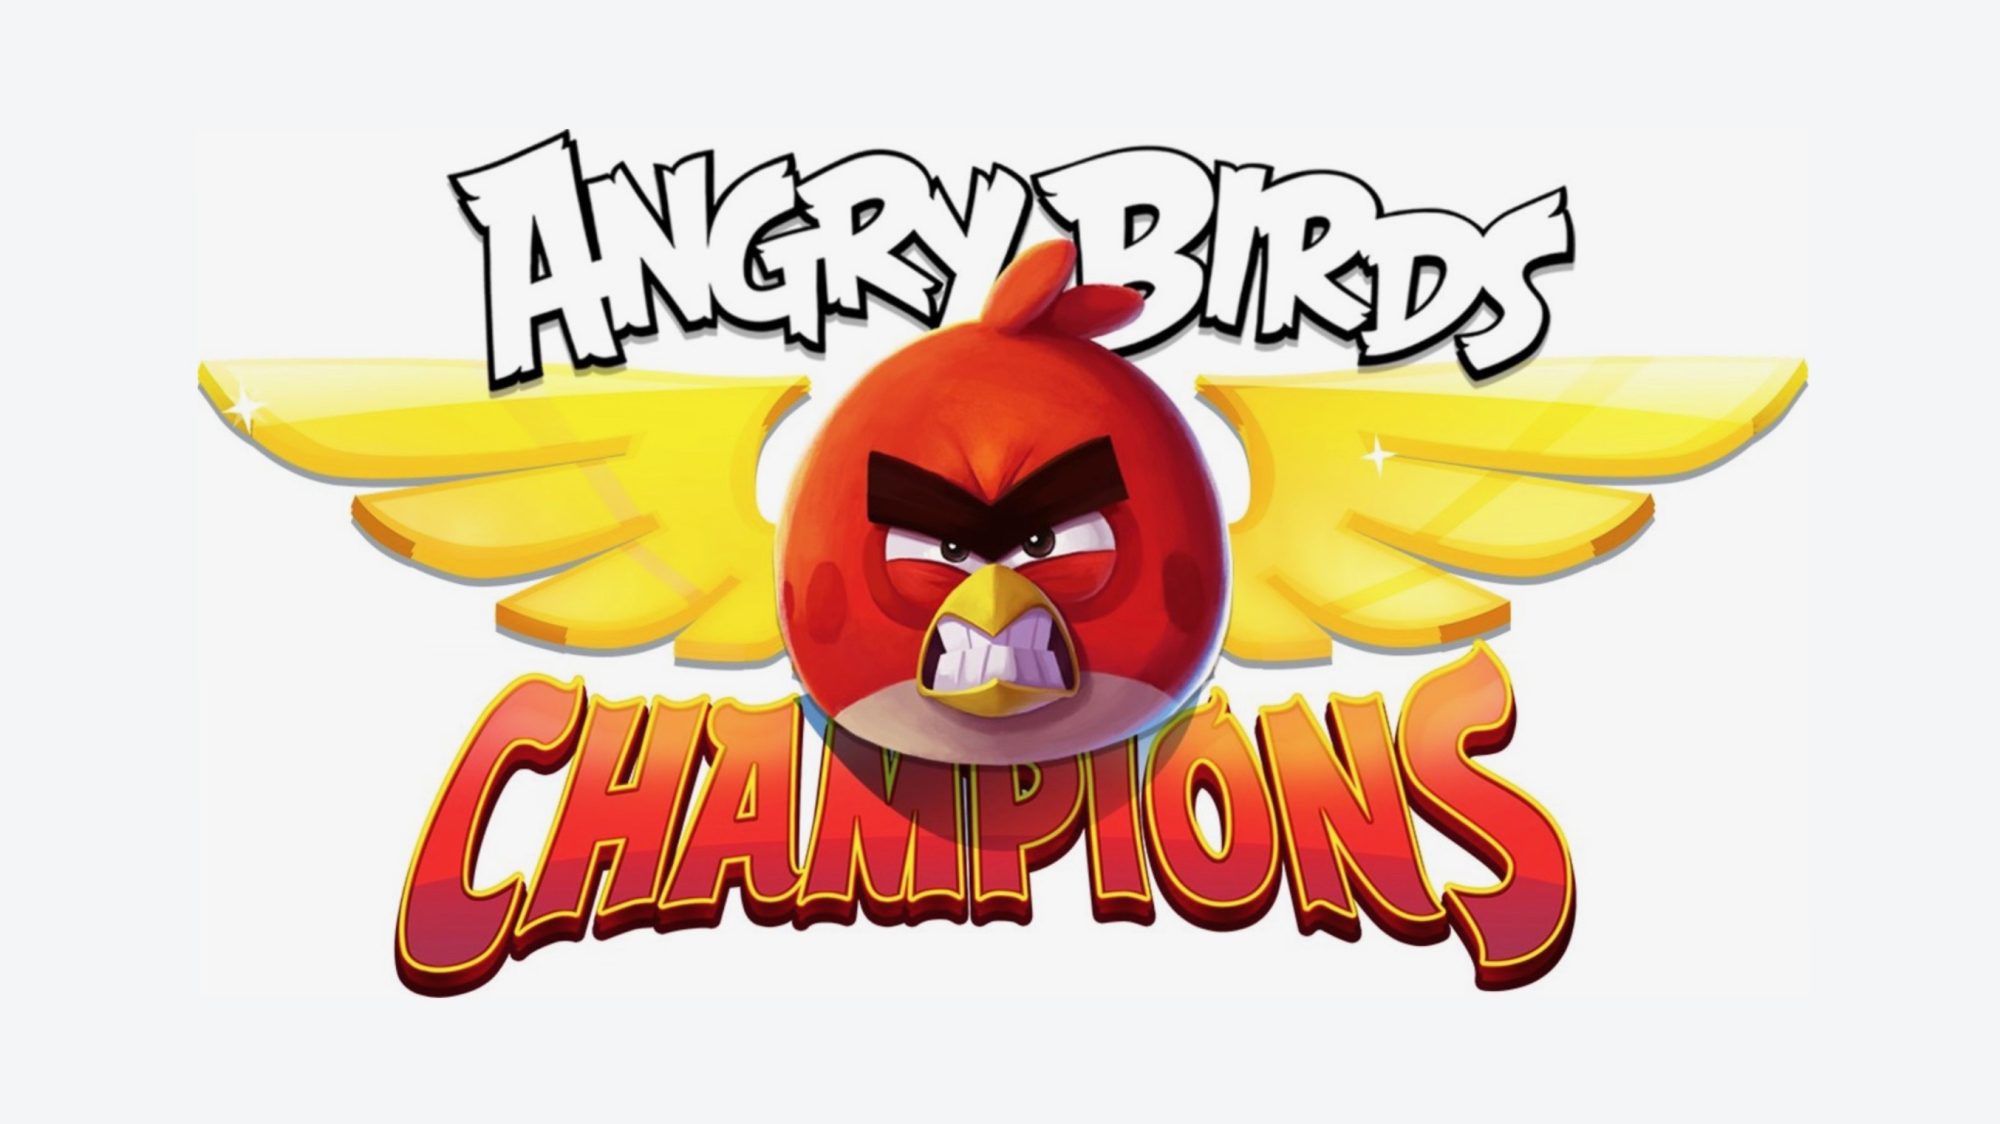 Angry Birds champions tournaments